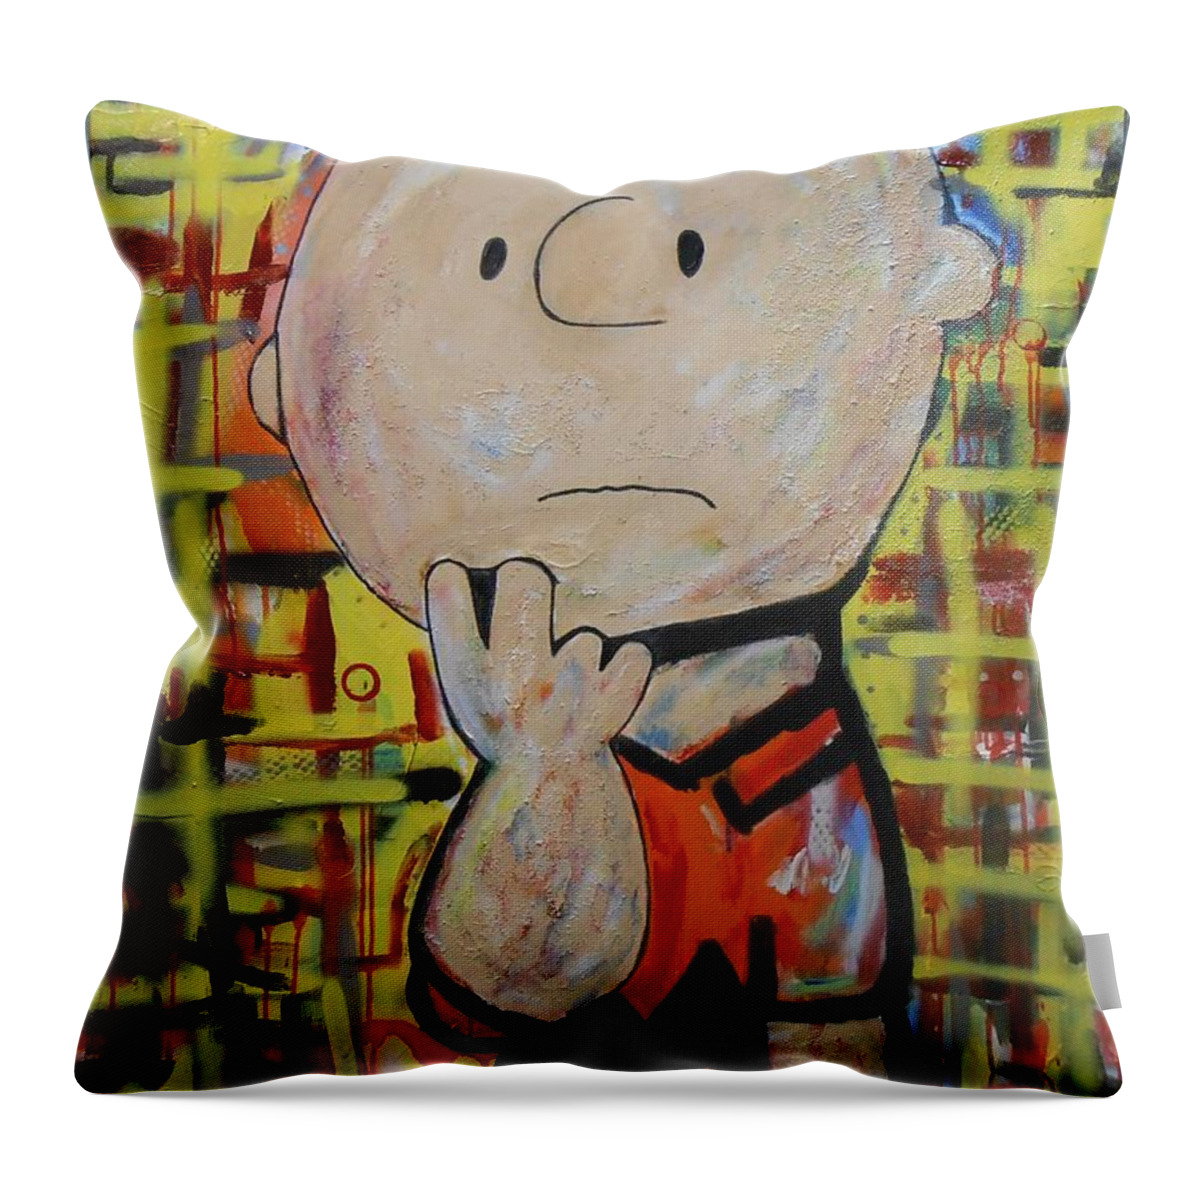 Abstract Throw Pillow featuring the painting What's Up Dude by GH FiLben